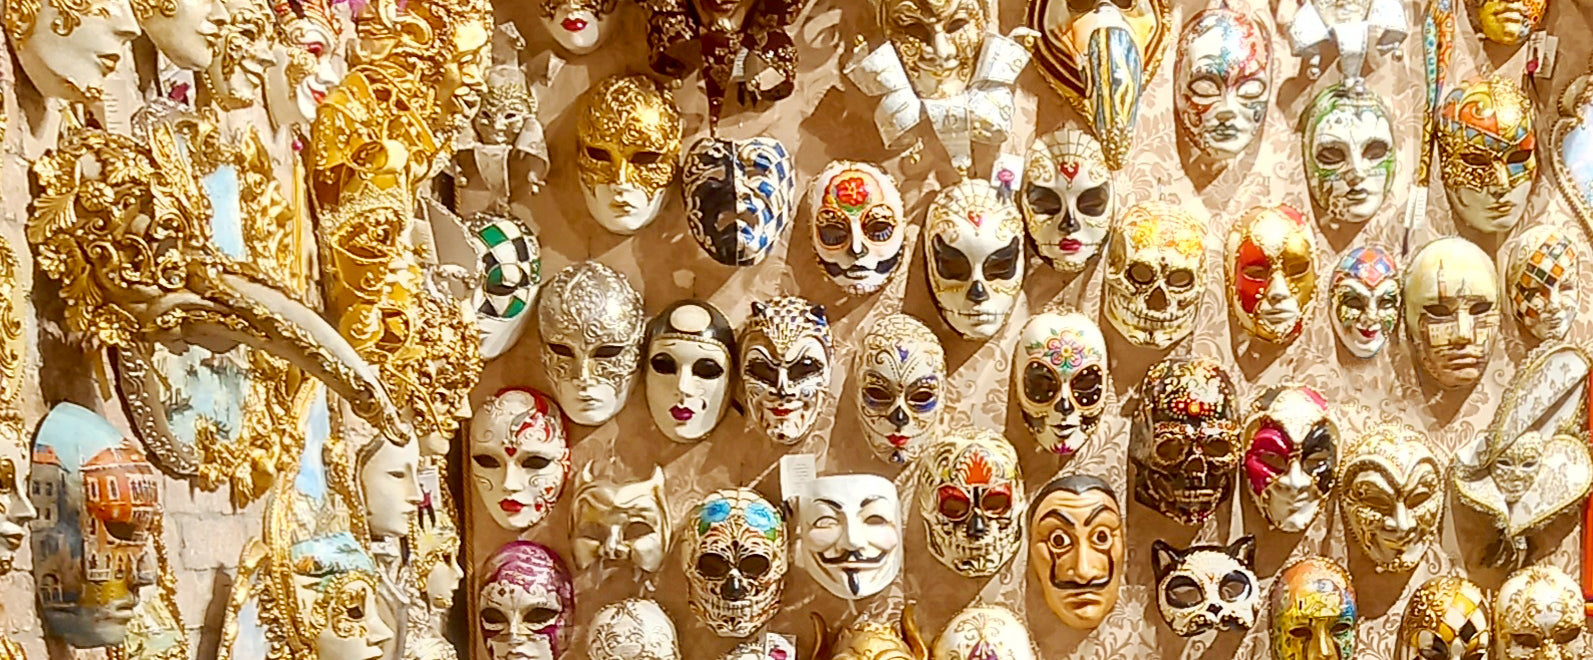 An unusual tour of Venice: the hidden face behind the mask